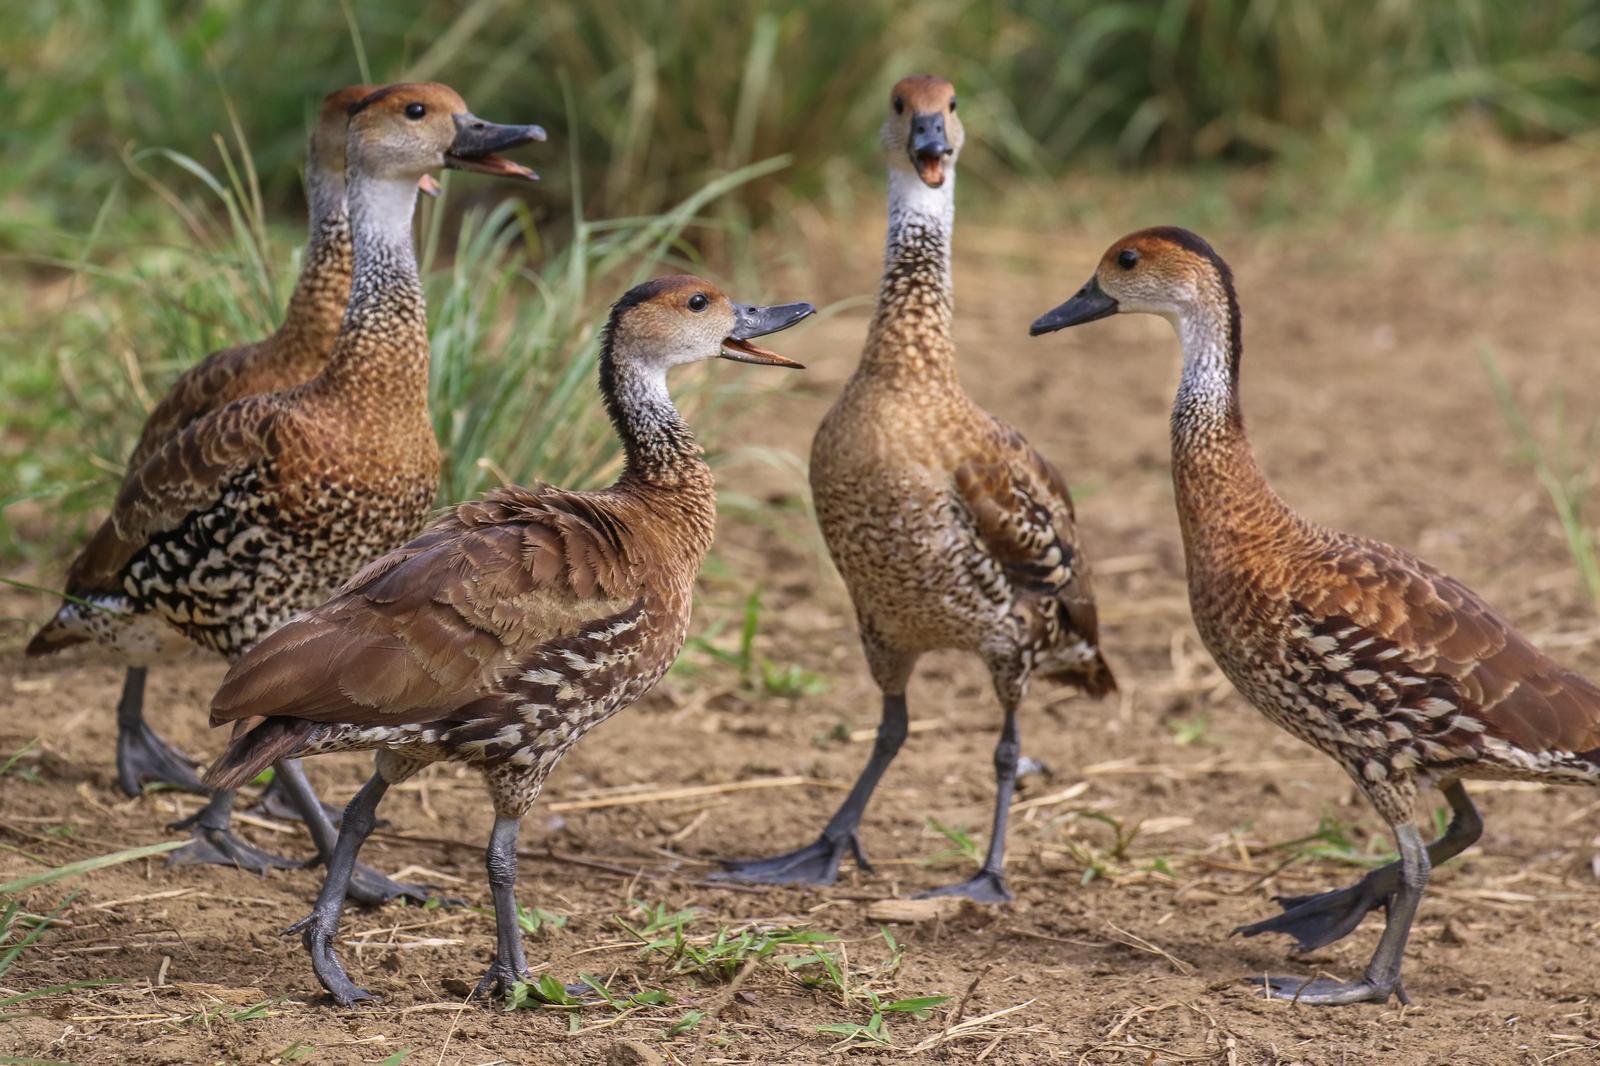 West Indian Whistling-Duck Photo by Tom Ford-Hutchinson